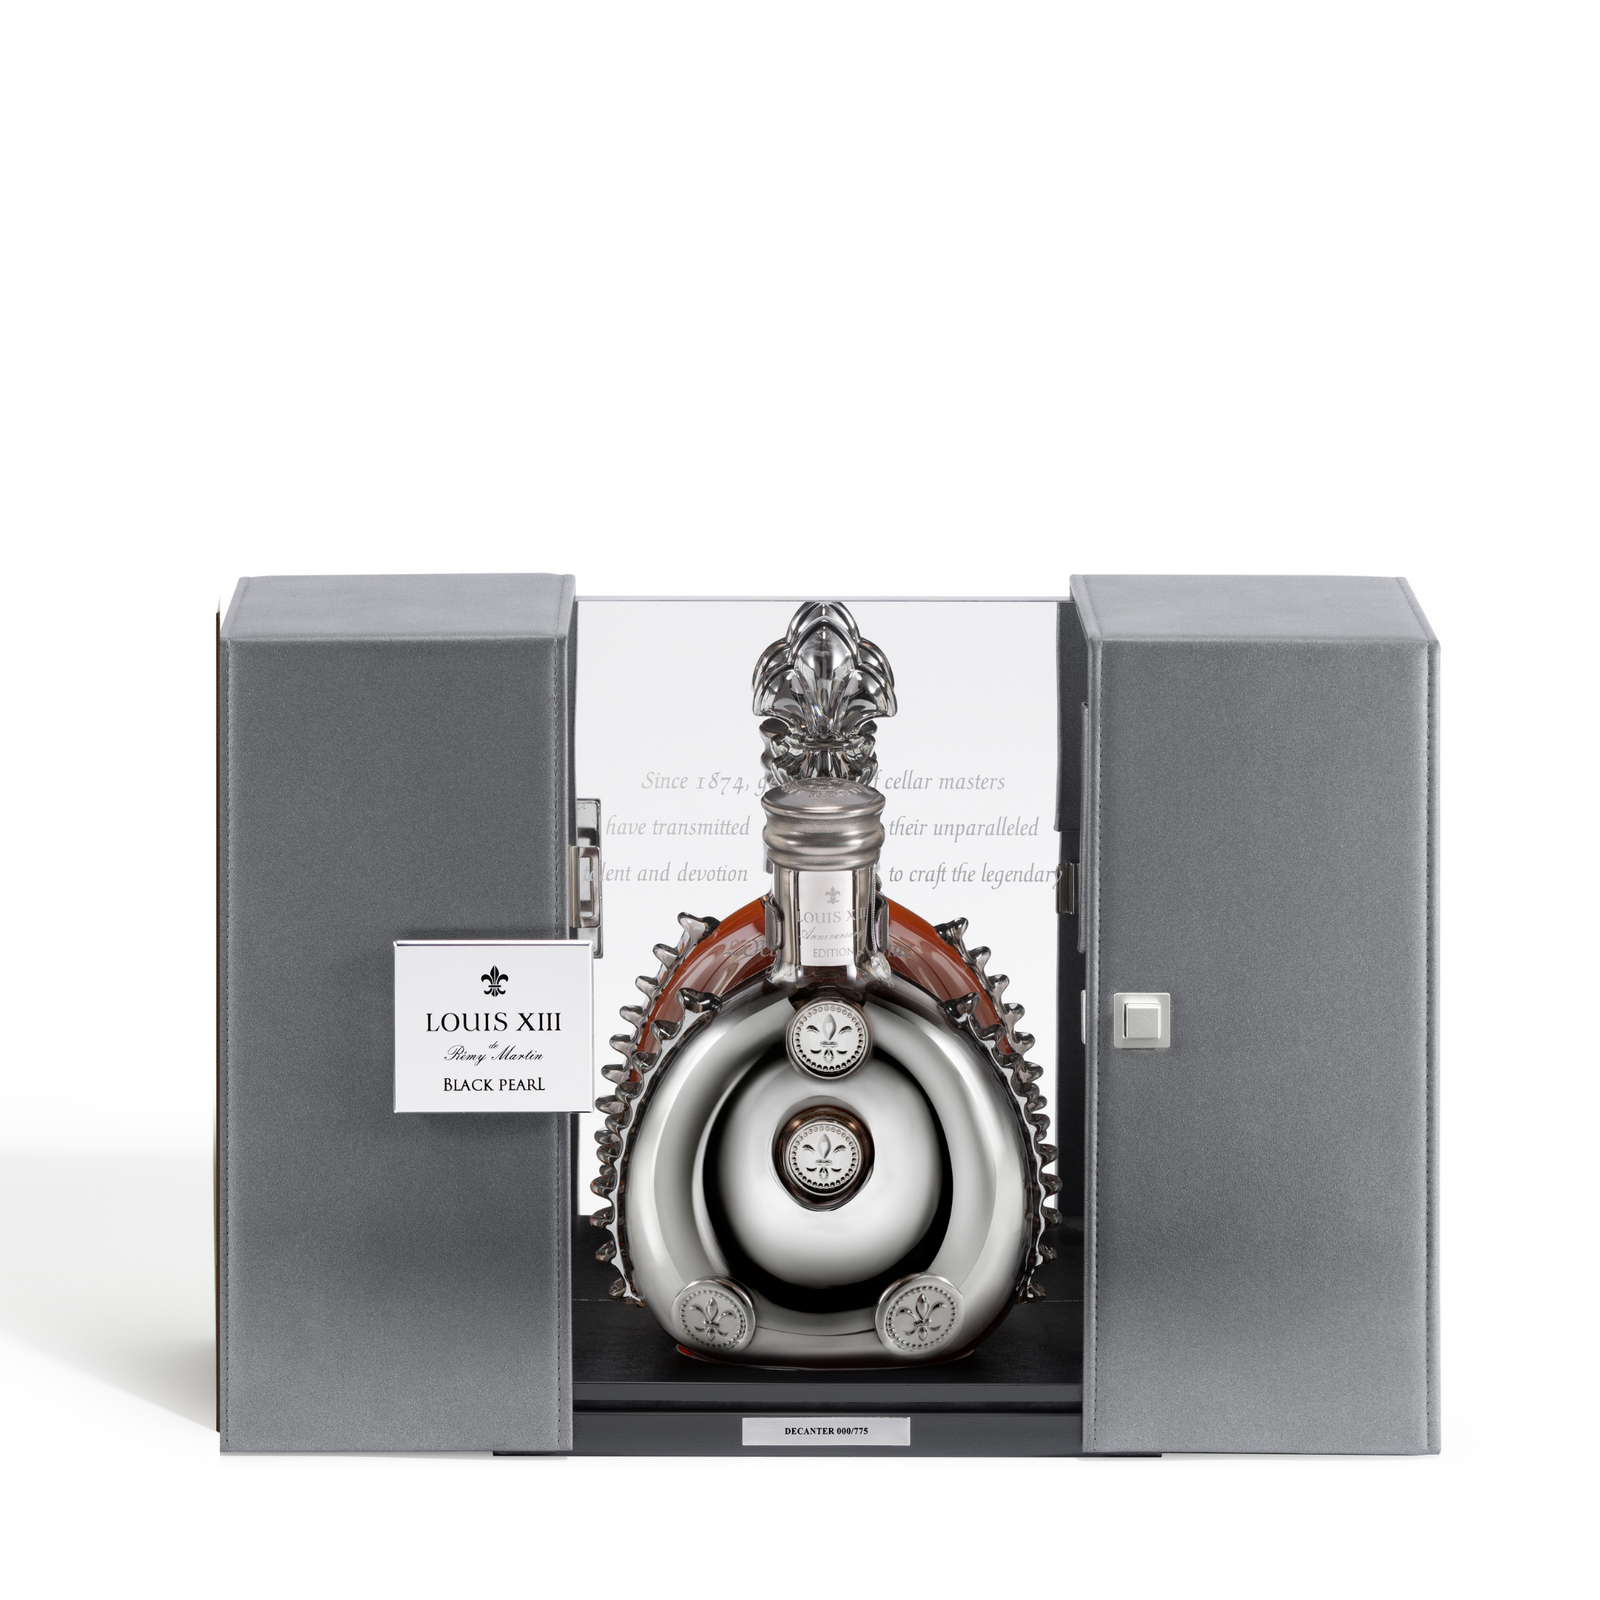 LOUIS XIII Black Pearl Anniversary Edition Released